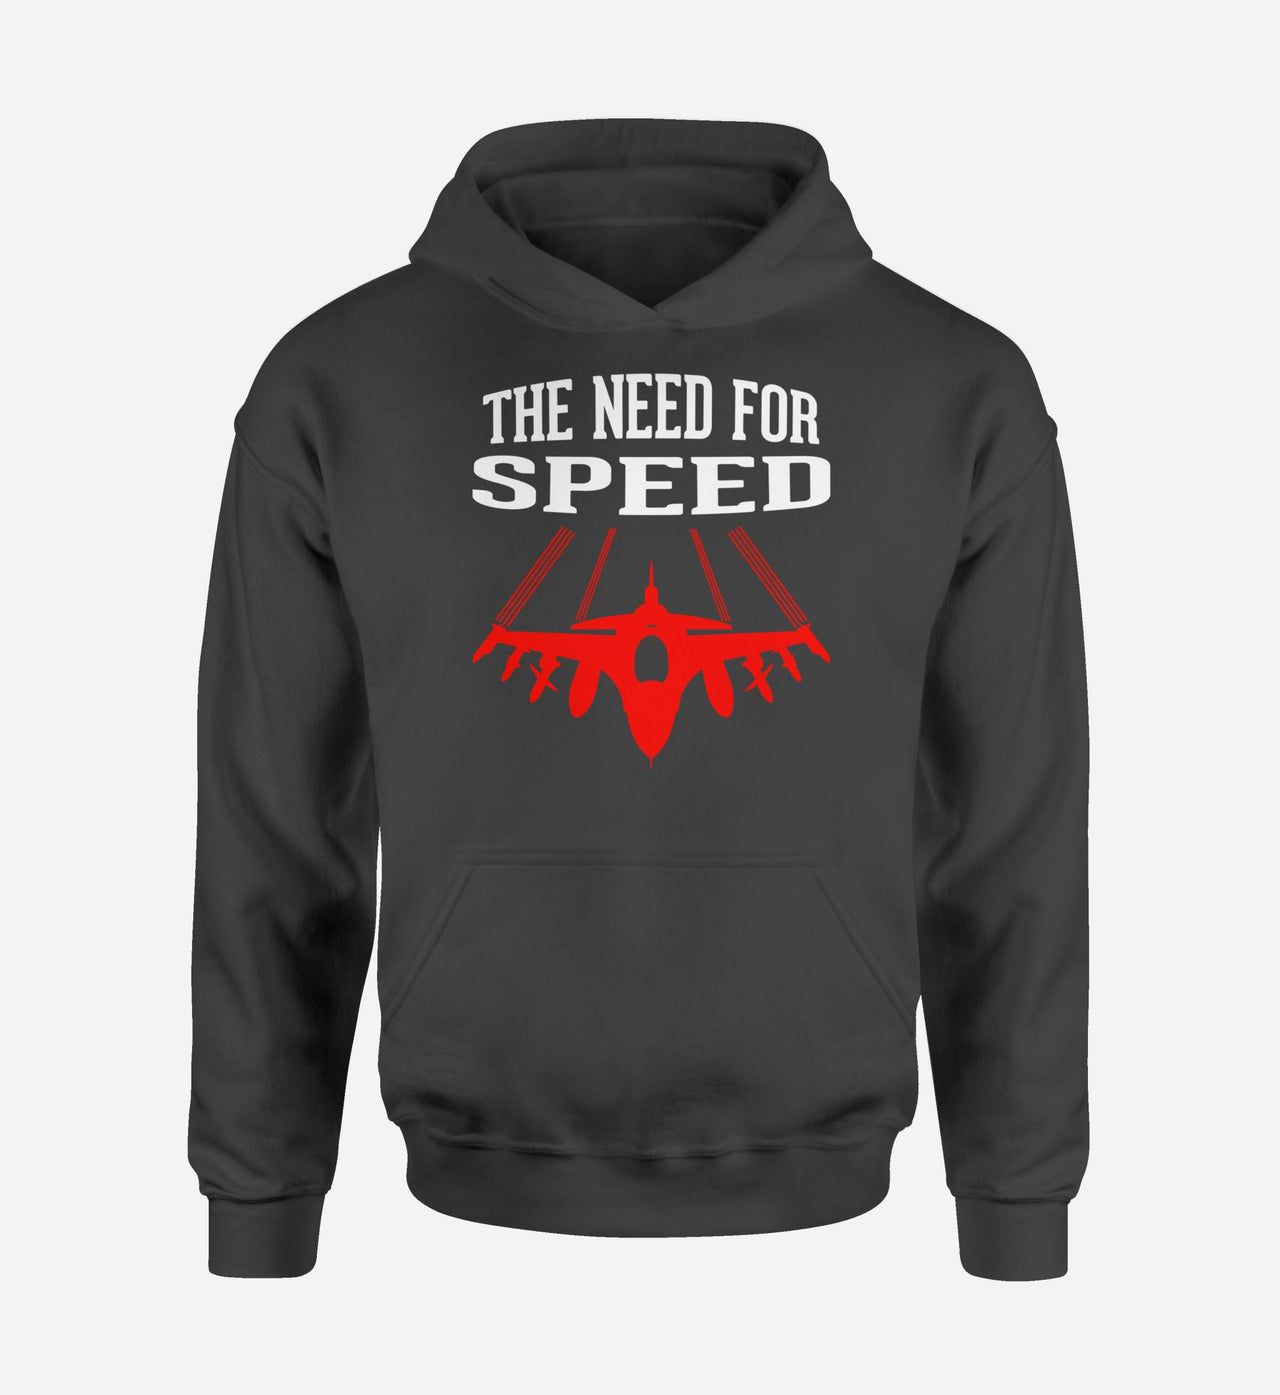 The Need For Speed Designed Hoodies